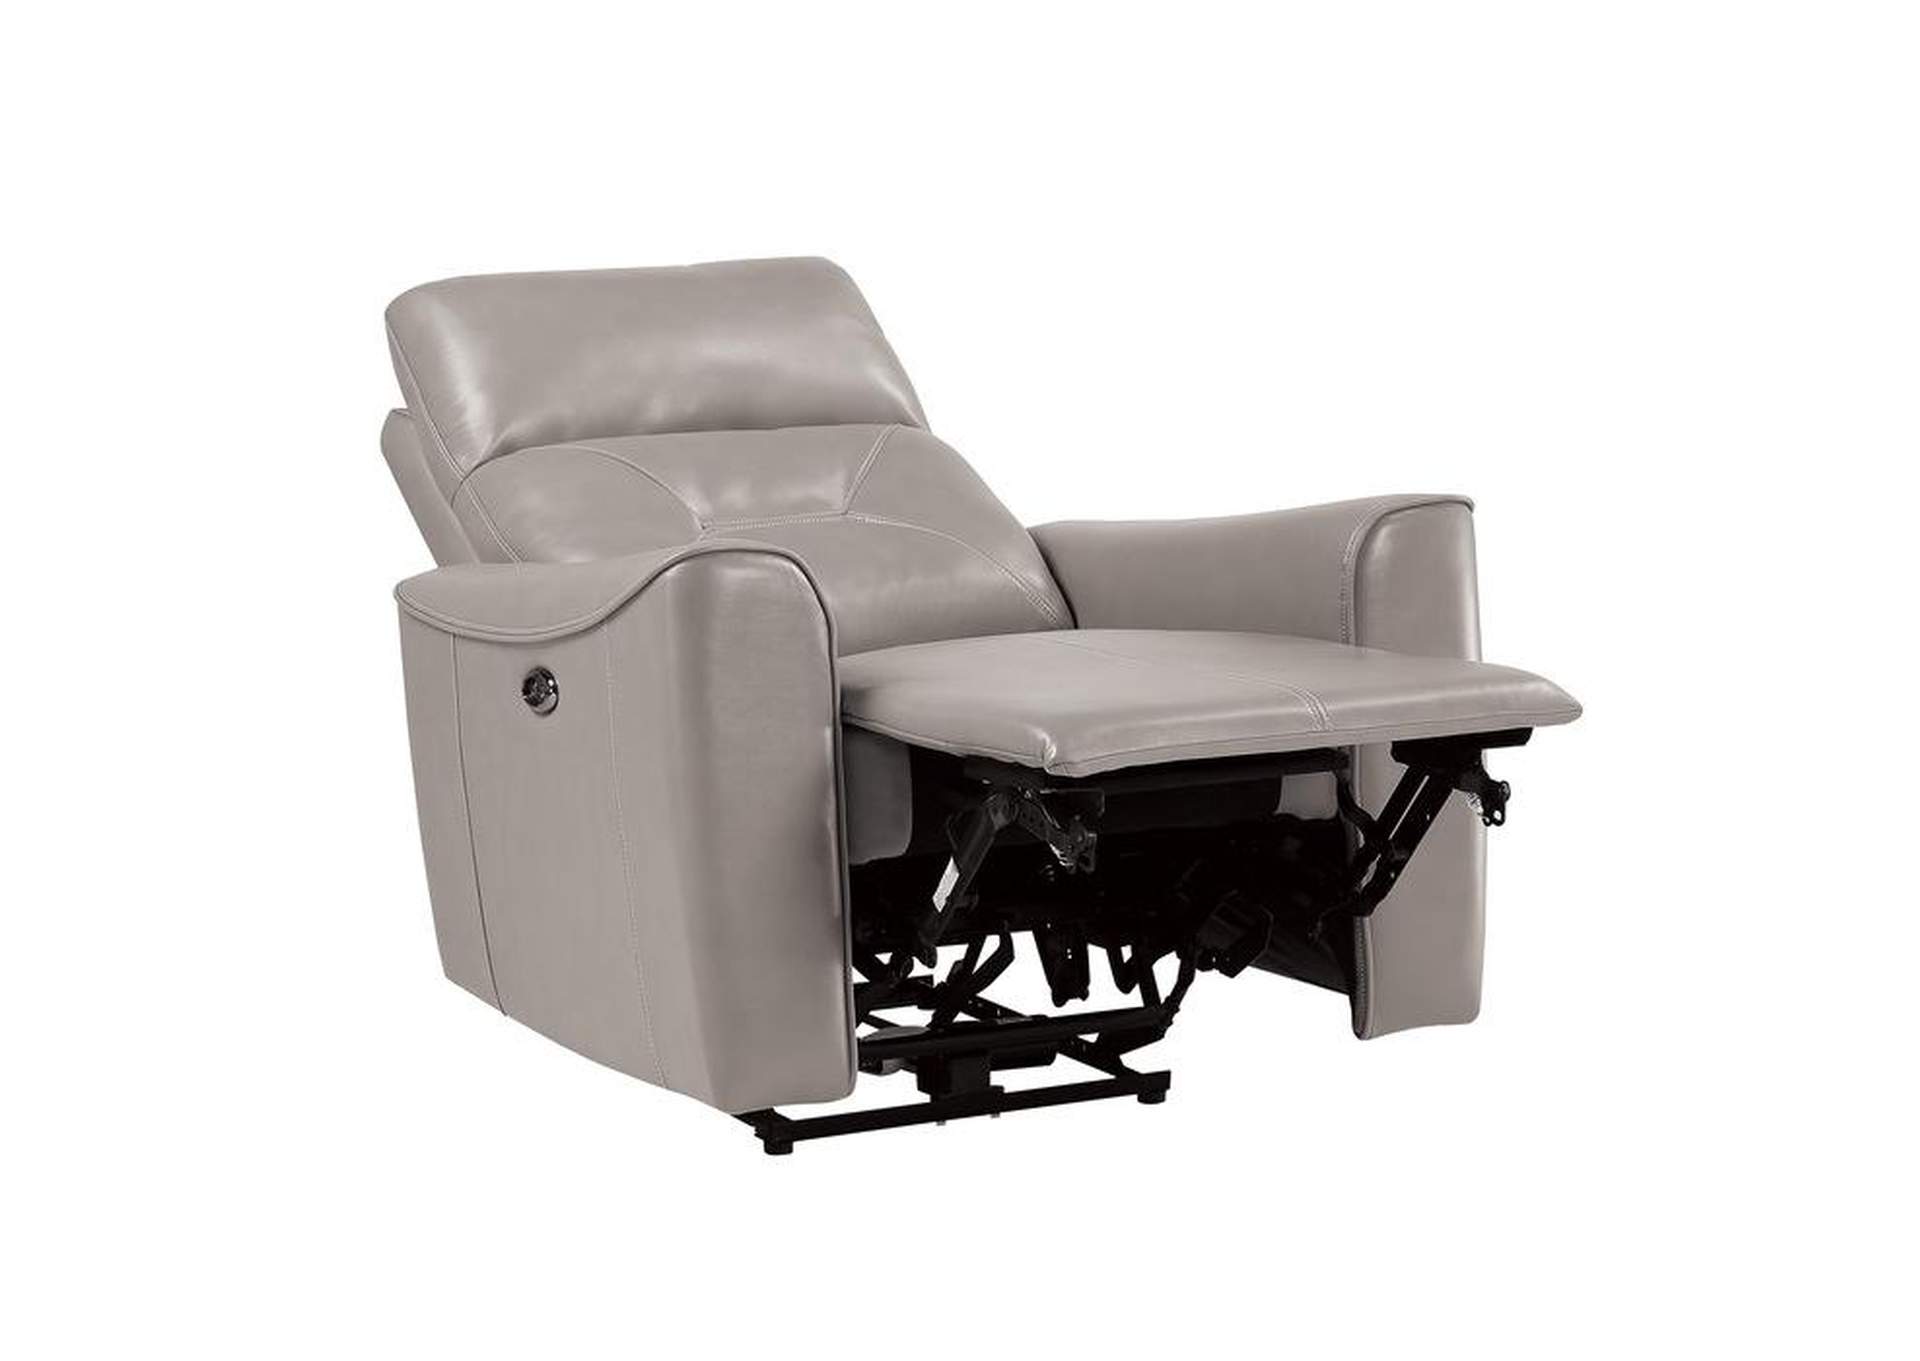 Burwell Power Reclining Chair With Usb Port,Homelegance